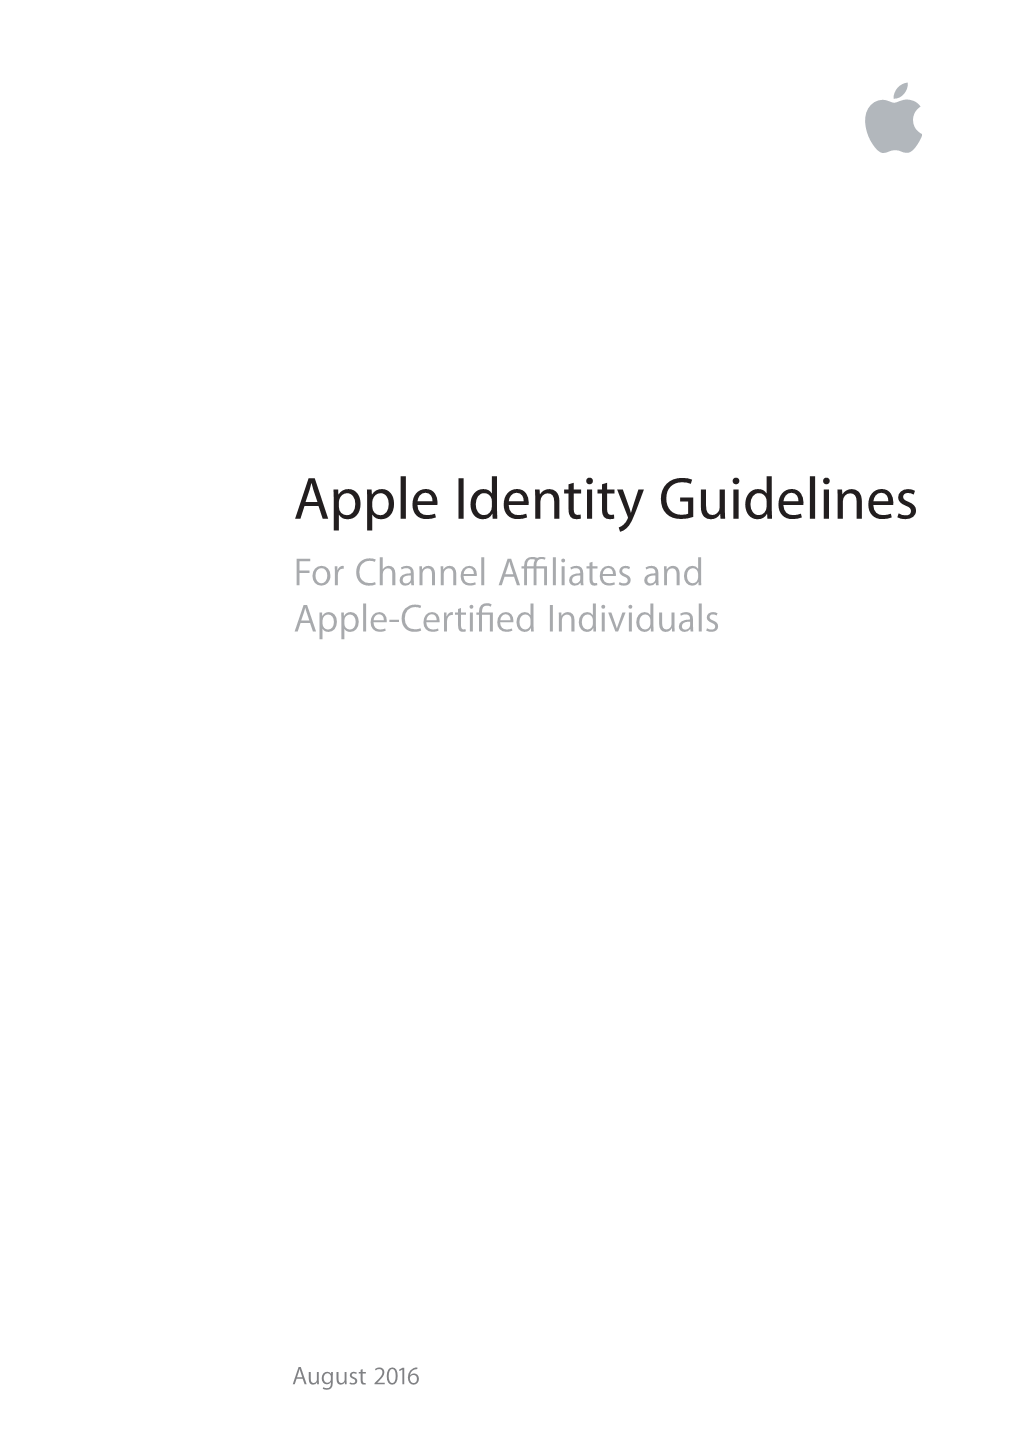 Apple Identity Guidelines for Channel Affiliates and Apple-Certiﬁed Individuals